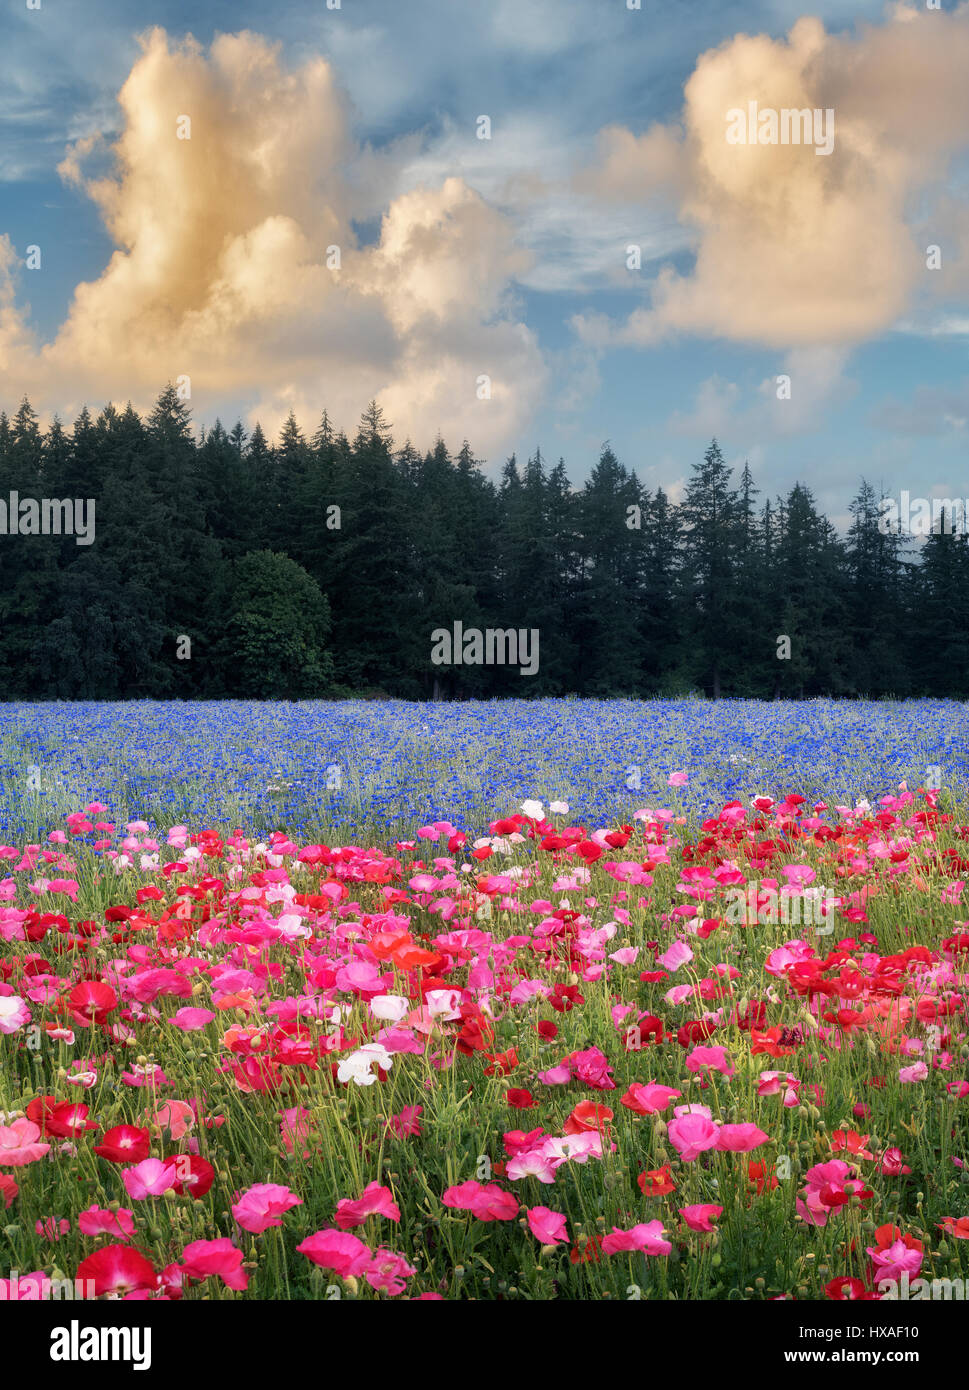 Field of poppies and bachelor buttons. Near Silverton, Oregon Stock Photo